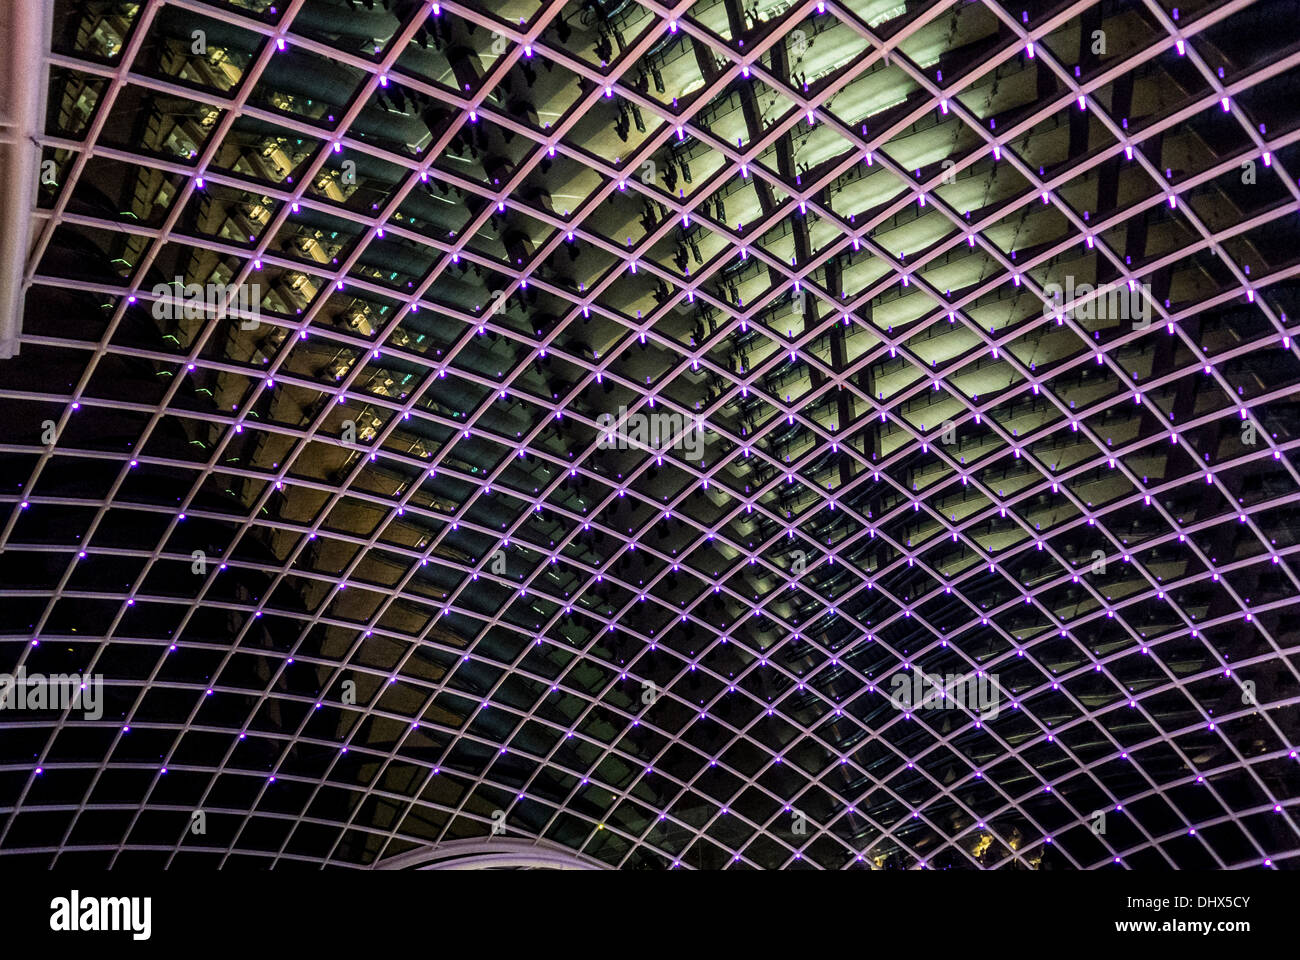 Domed roof structure at Leeds Trinity Shopping Centre, seen from inside at night. Leeds, UK. Stock Photo